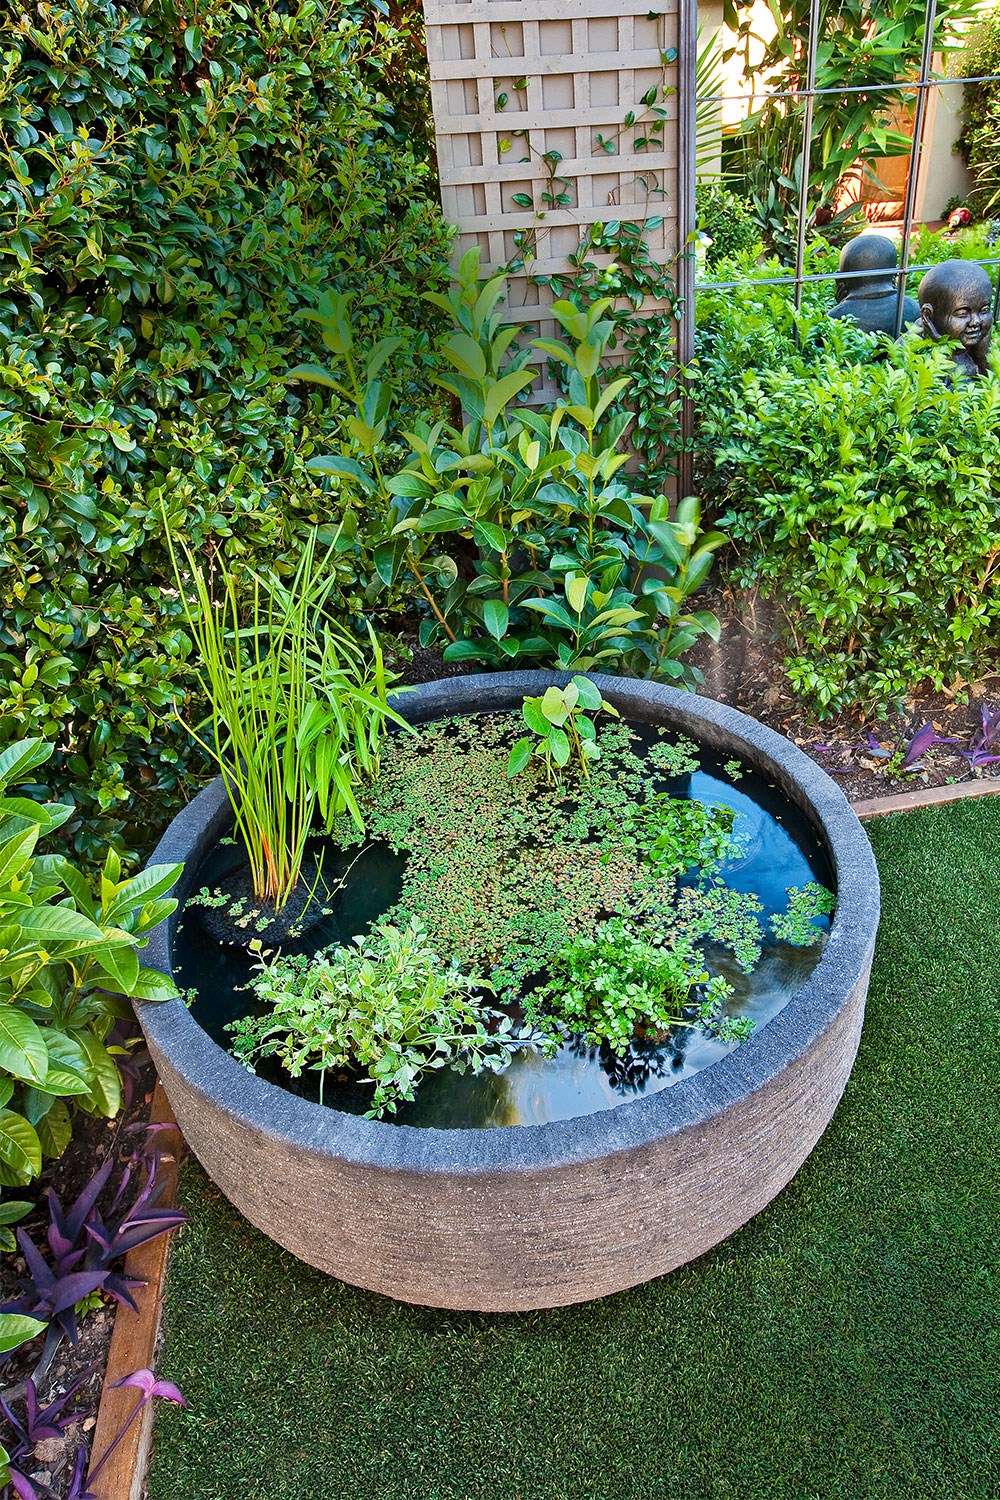 How to turn your pond into a vegie patch | Better Homes and Gardens